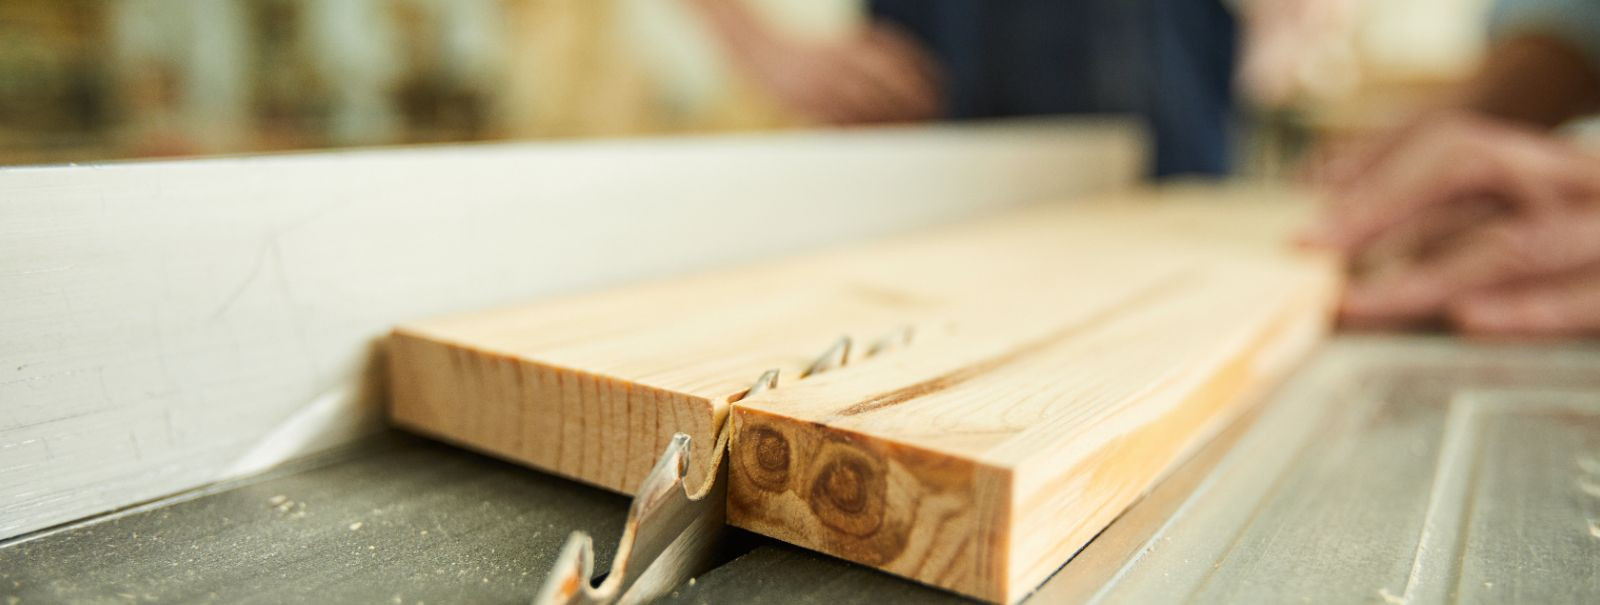 Woodworking is an ancient practice that dates back to the earliest civilizations. From the construction of primitive tools to the crafting of intricate furnitur